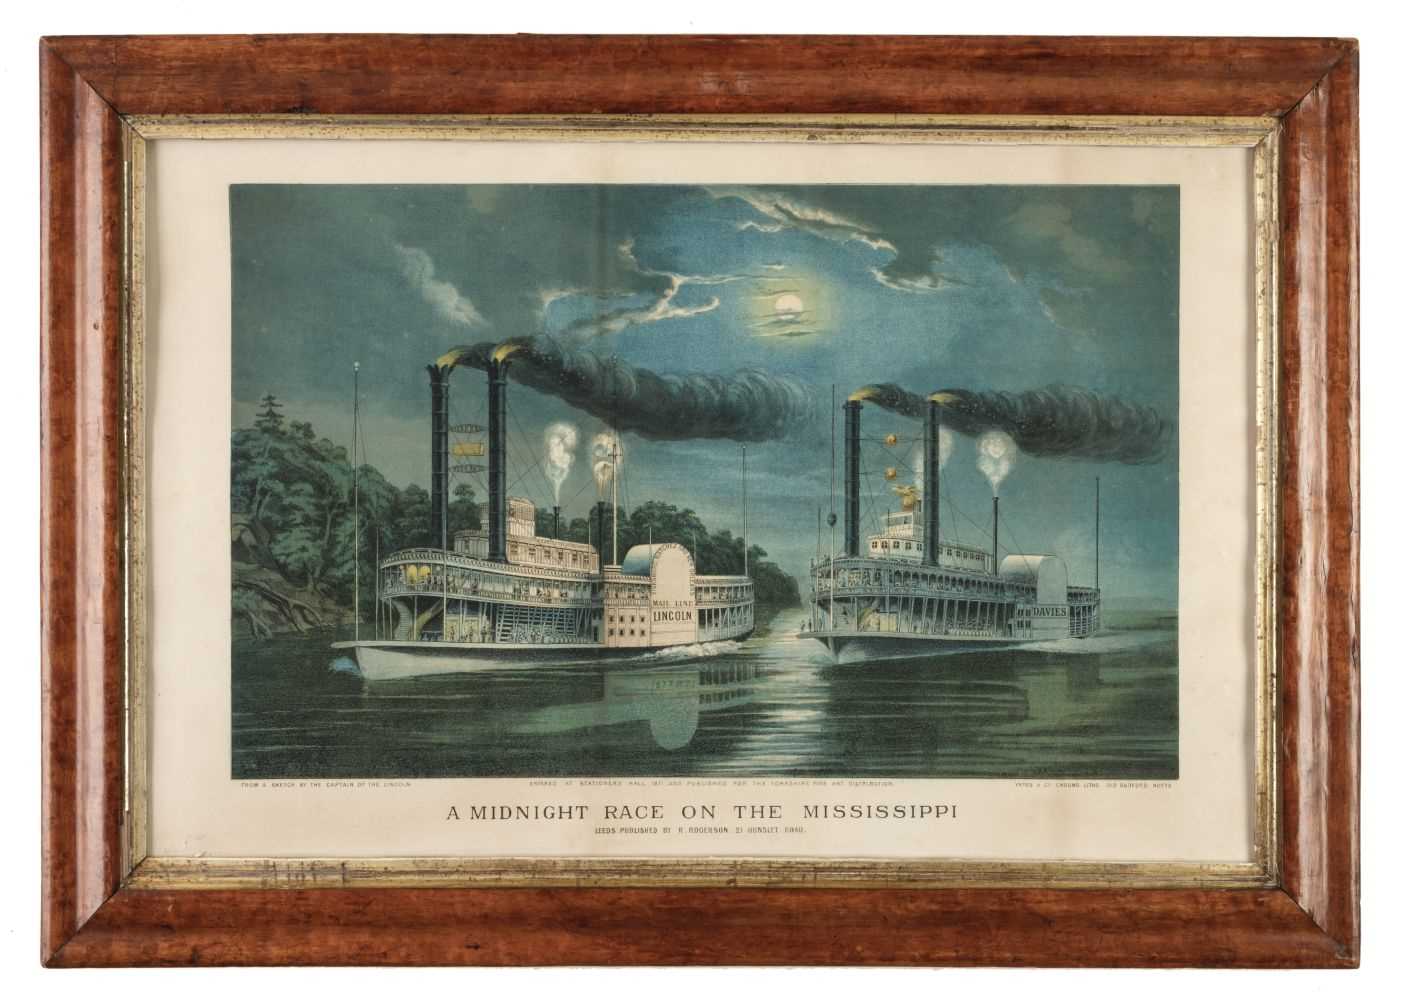 Lot 240 - Rogerson R., (publisher). A Midnight Race on the Mississippi, 1871